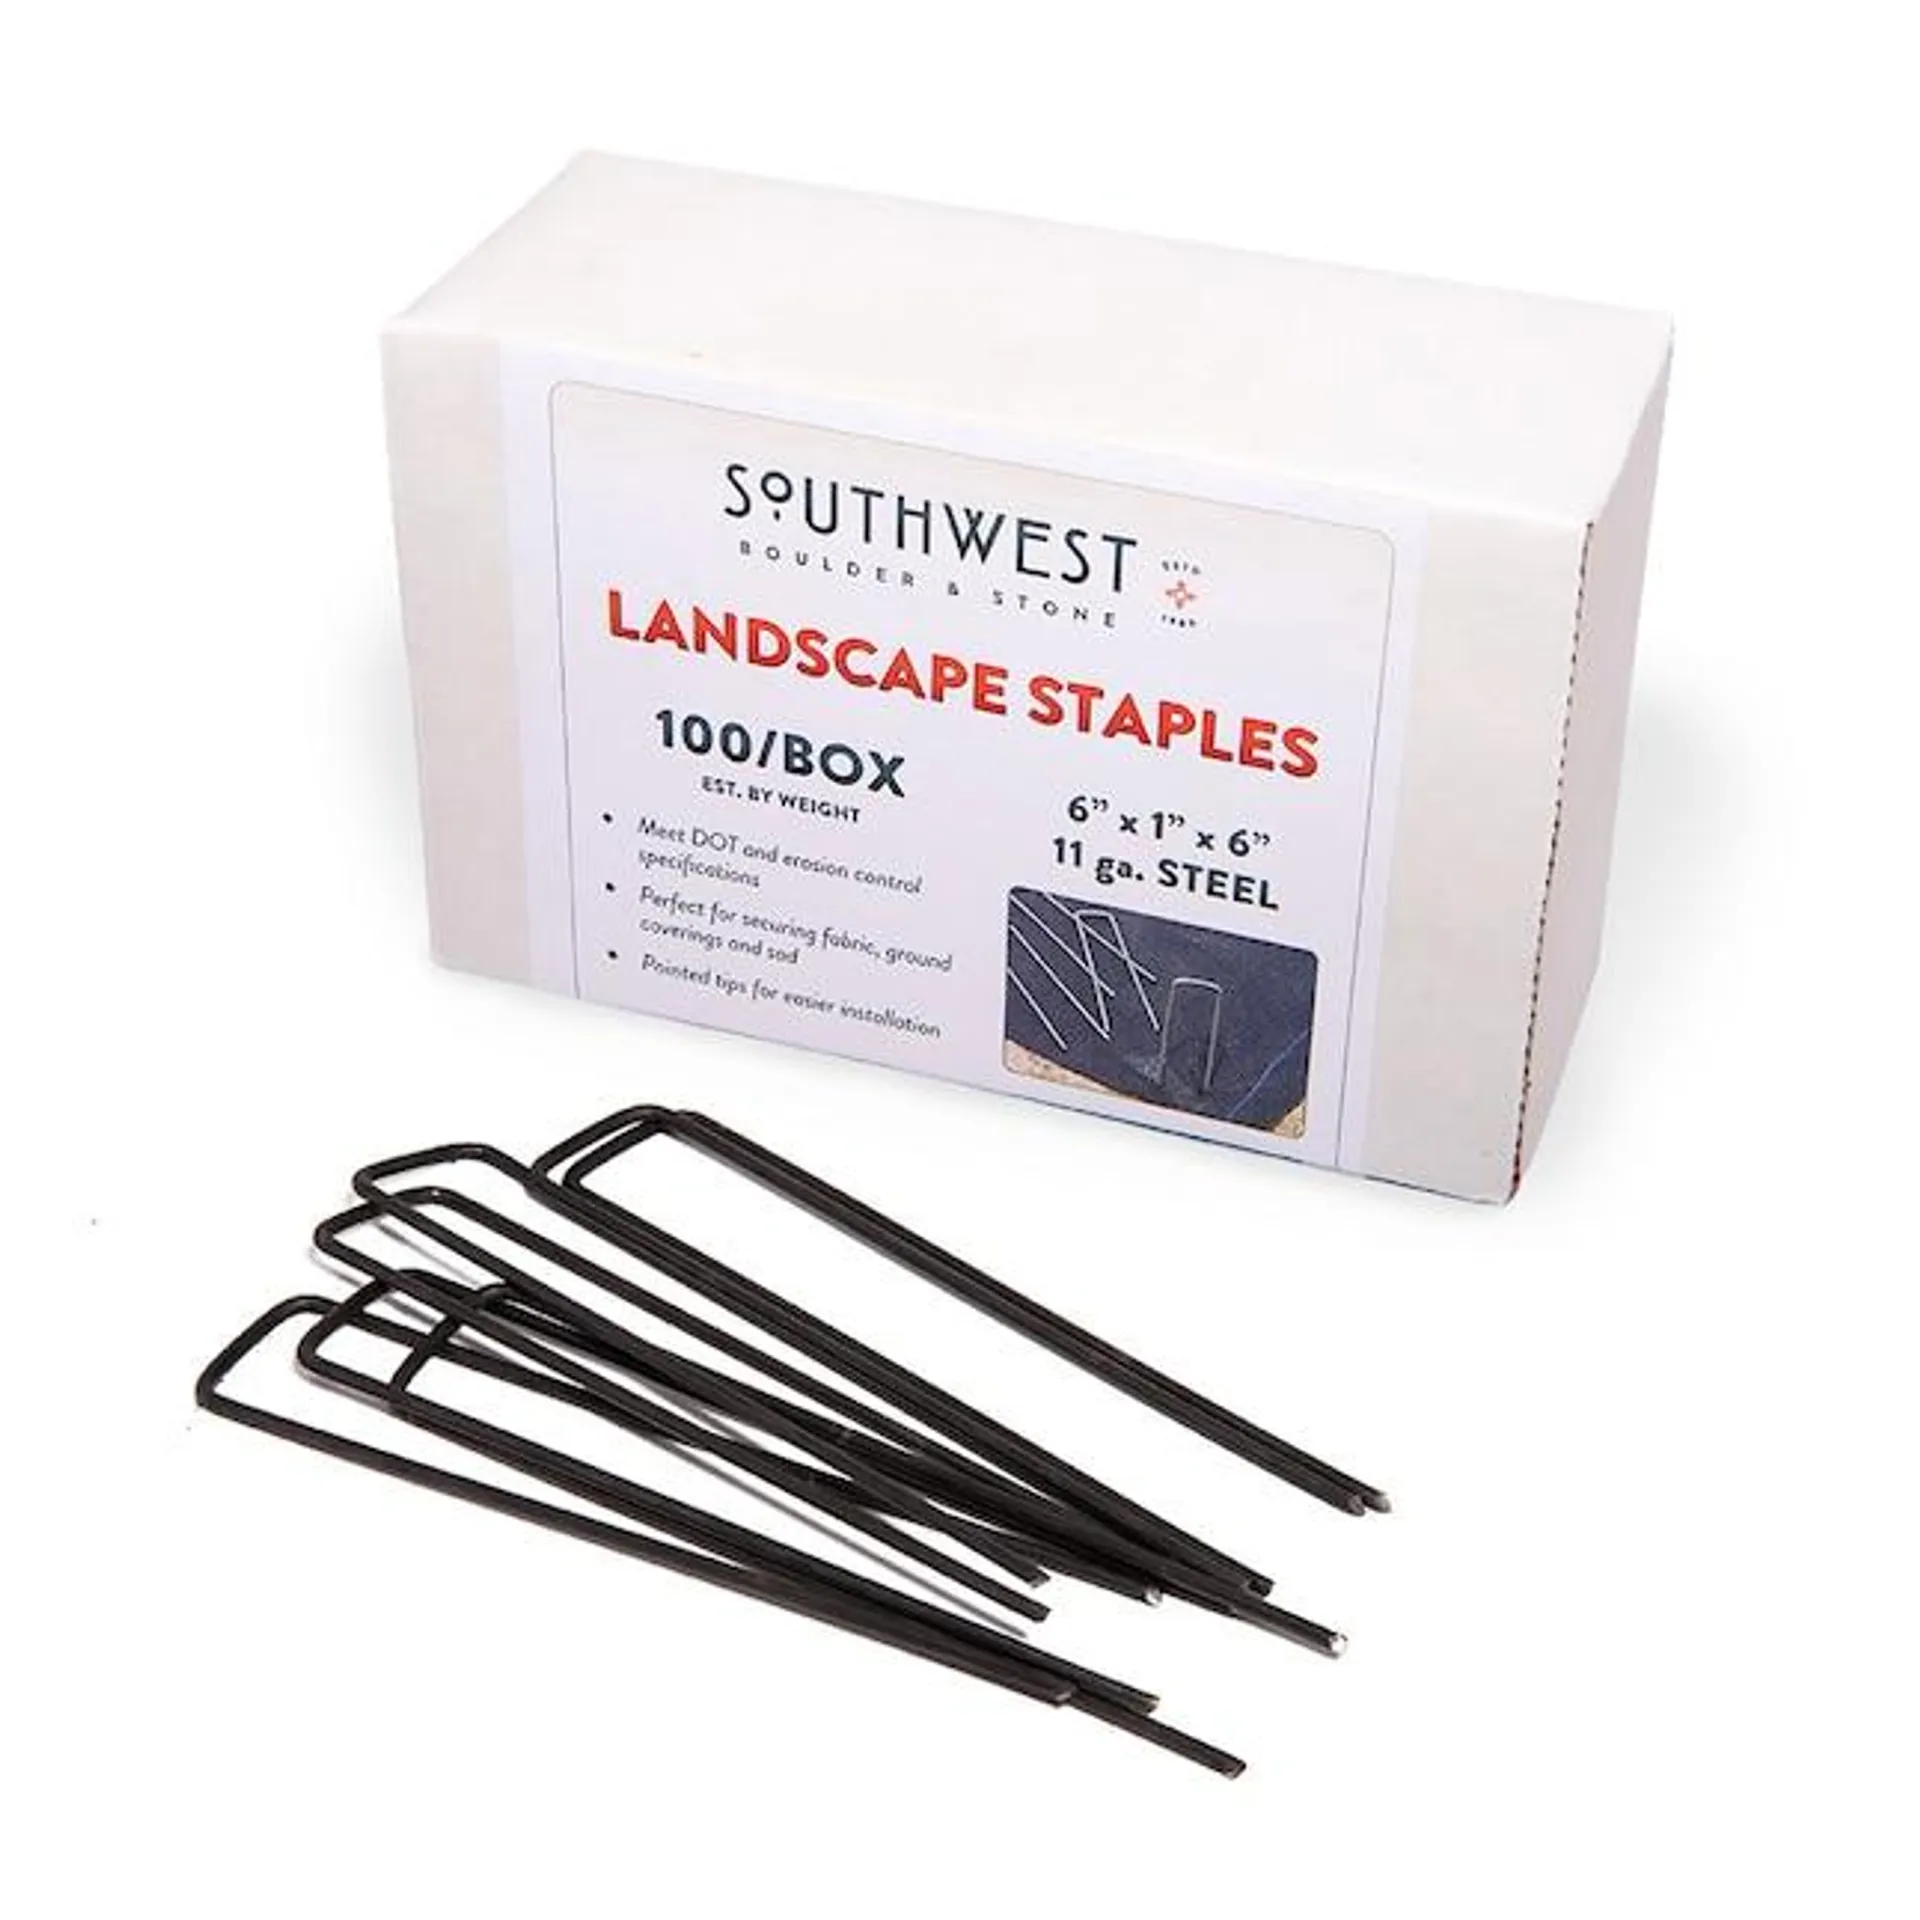 Southwest Boulder & Stone Heavy Duty 6-Inch Black Metal Garden Stakes (100-Pack) - 11 Gauge Steel Landscape Staples for Weed Barrier and Irrigation Lines